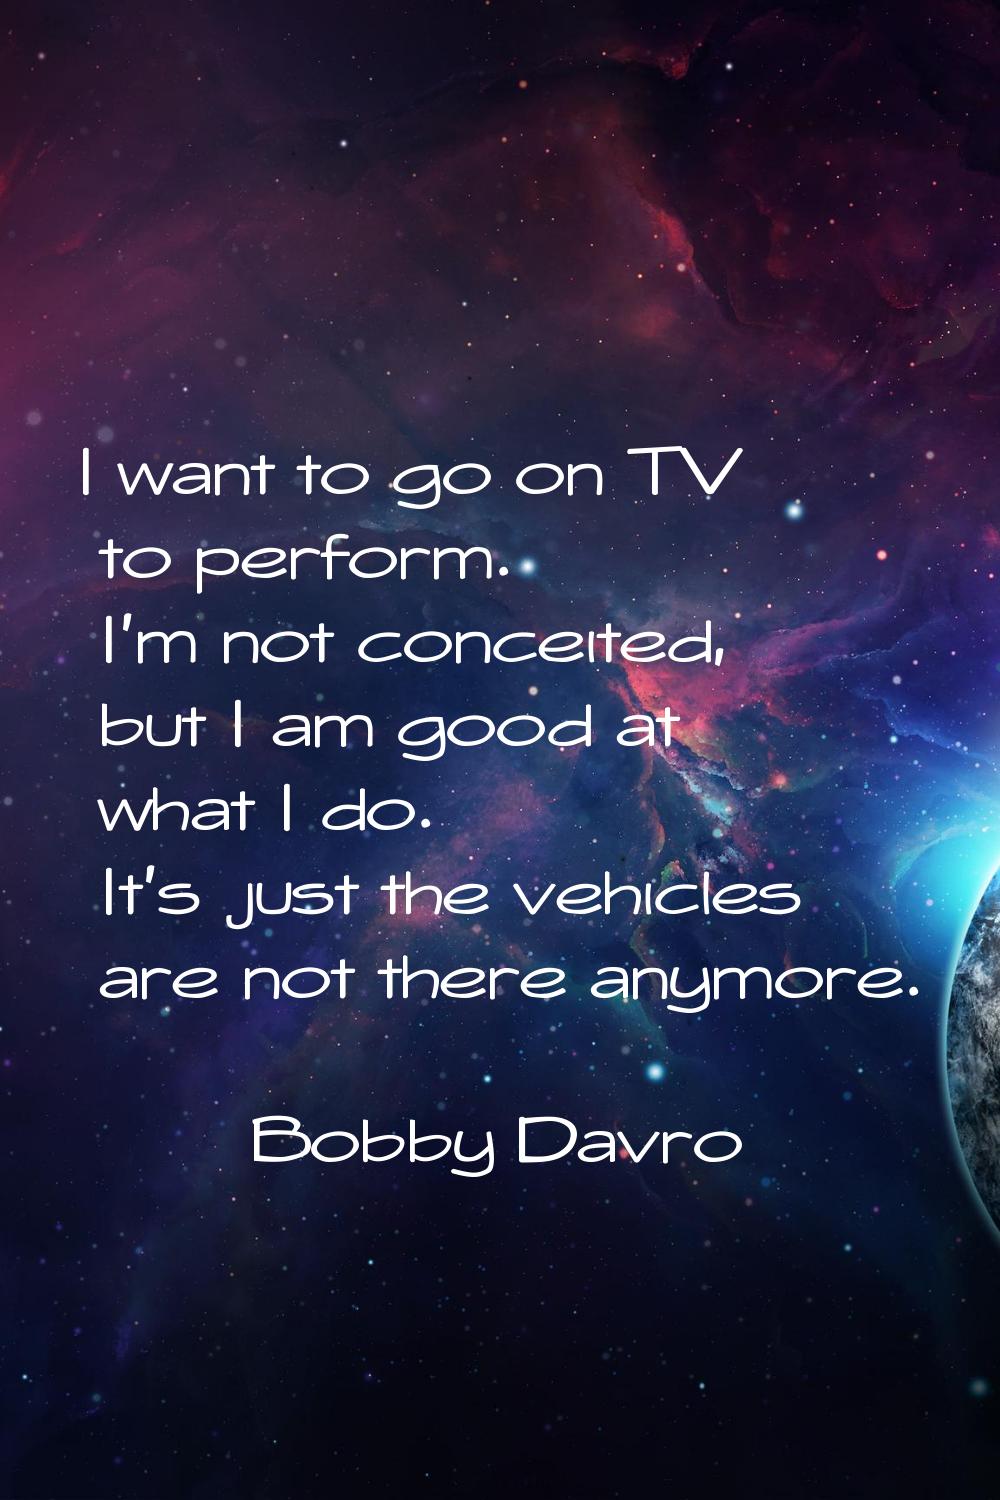 I want to go on TV to perform. I'm not conceited, but I am good at what I do. It's just the vehicle